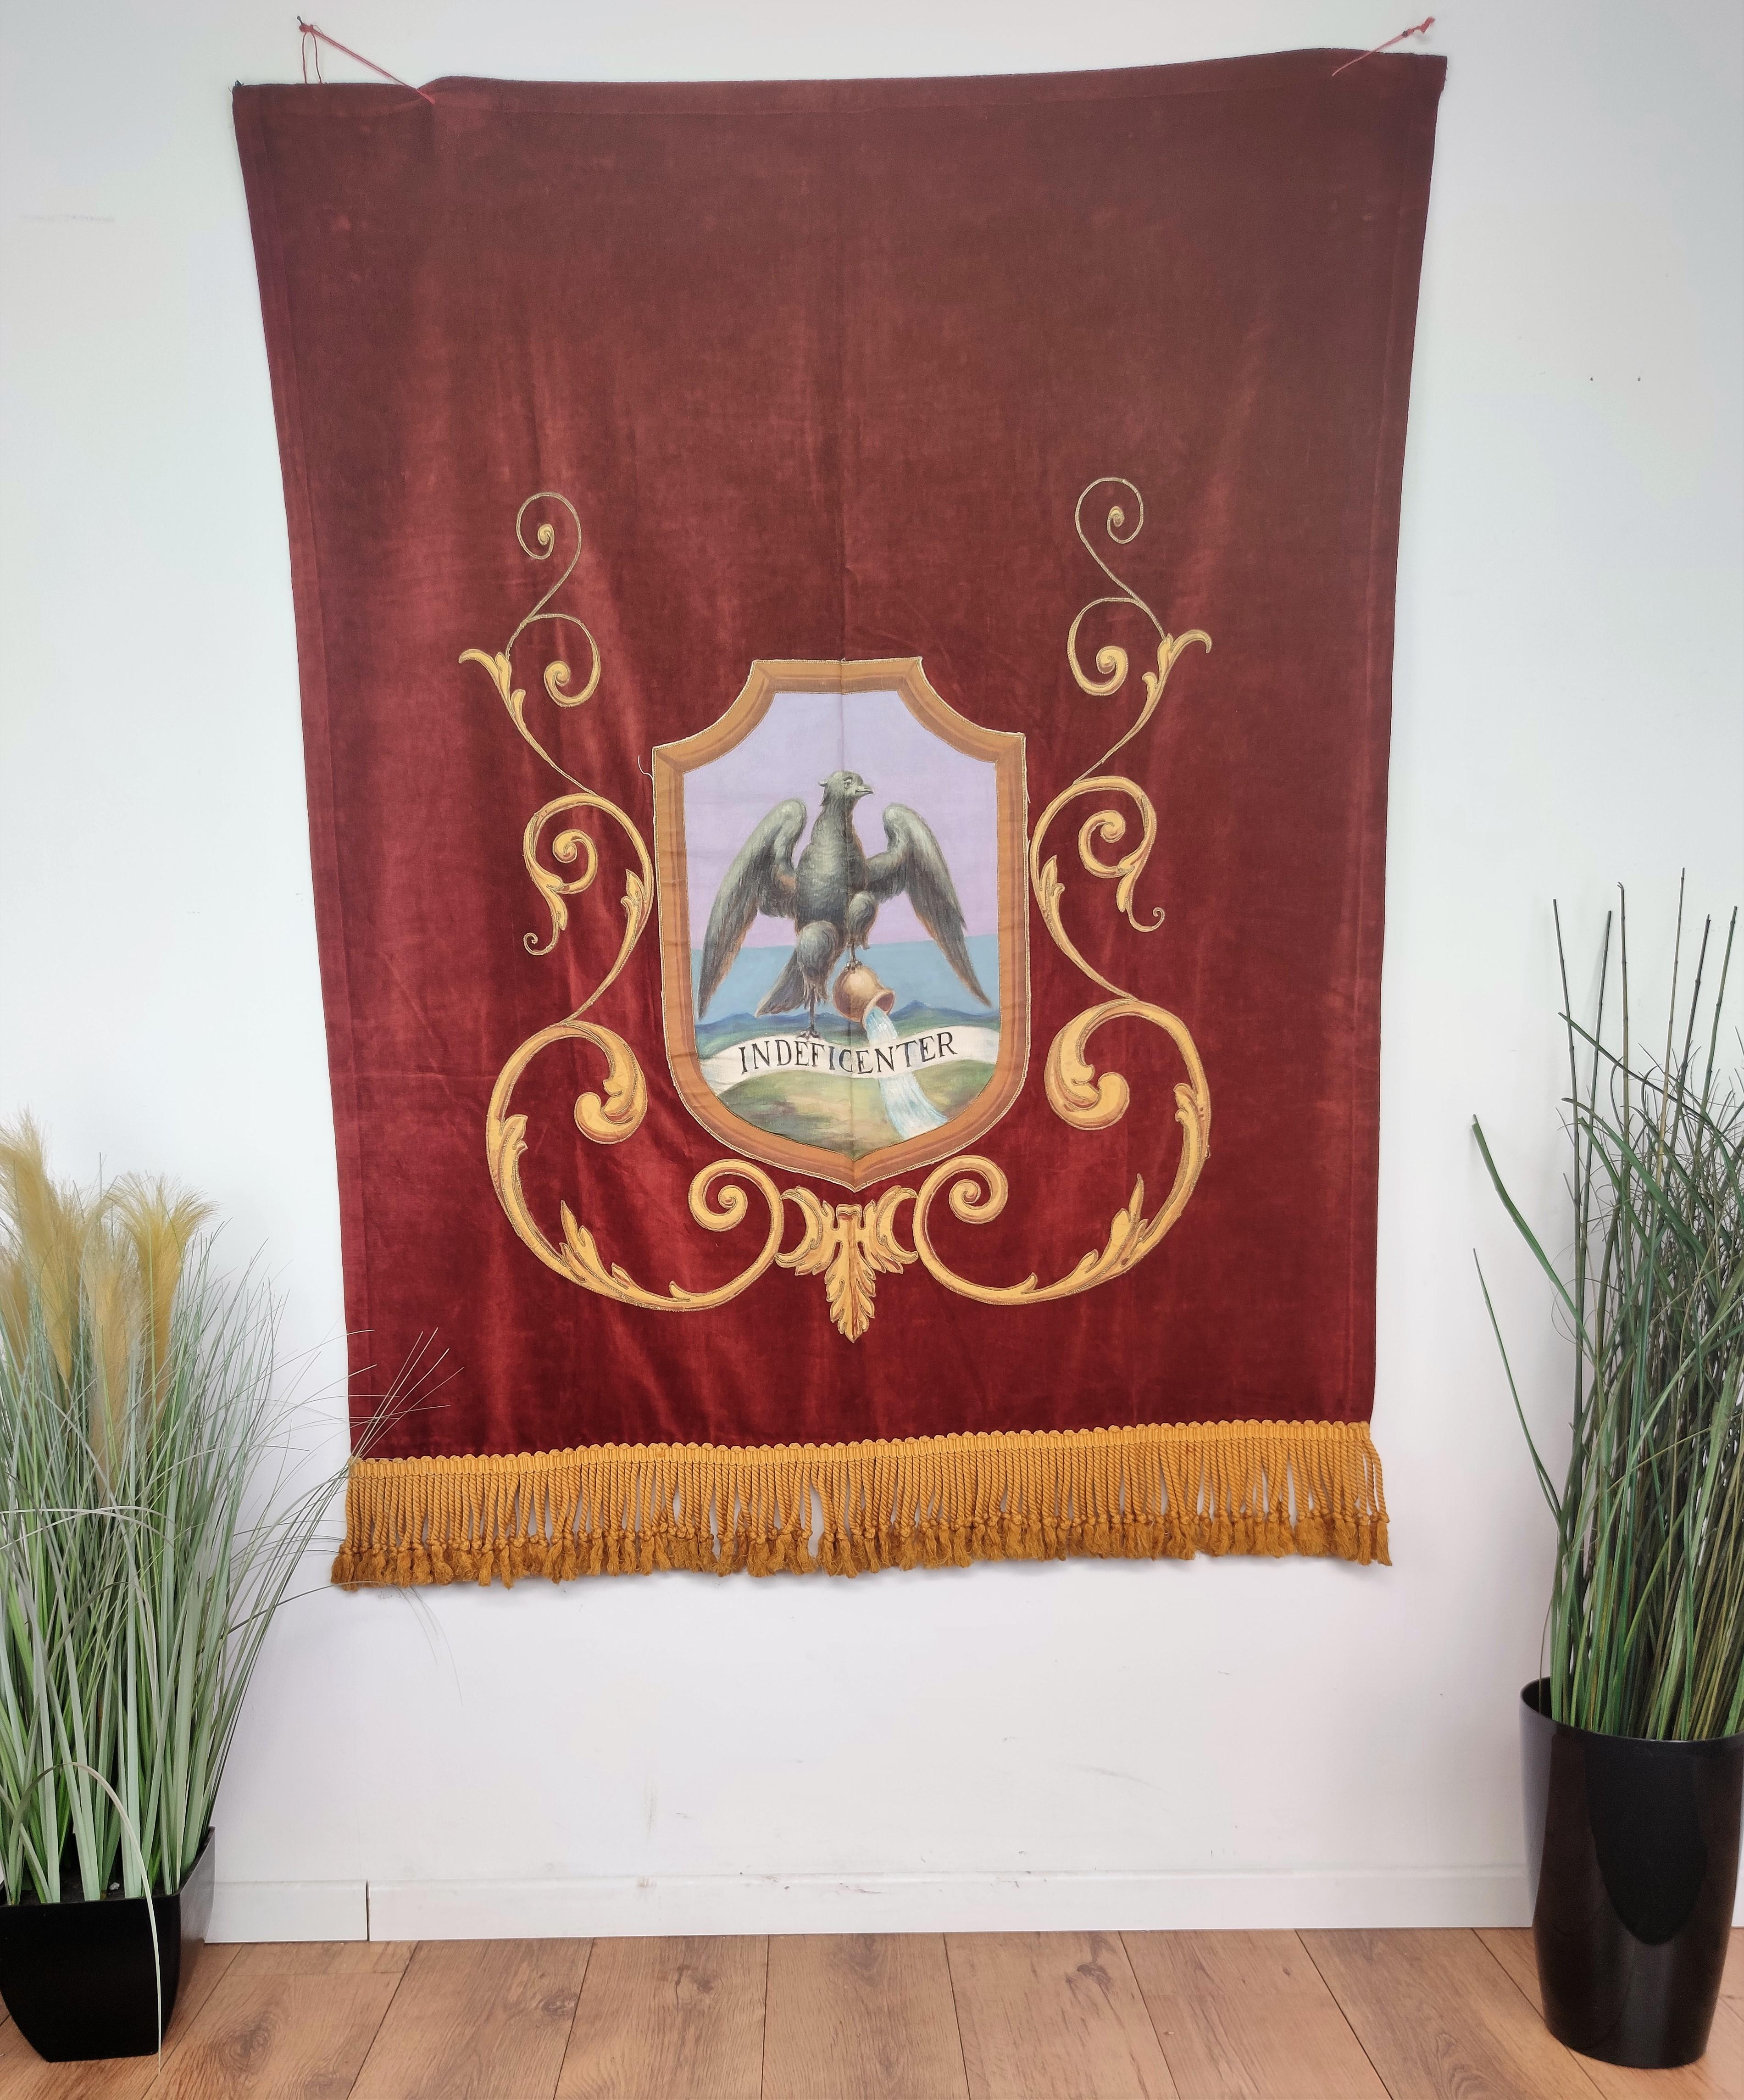 Beautiful Italian fabric tapestry in bordeaux velvet background with hand painted coat of arms representing the city of Fiume symbol with golden thread classic decors on the sides. 

After WW1 the city of Fiume or Rijeka was not assigned either to